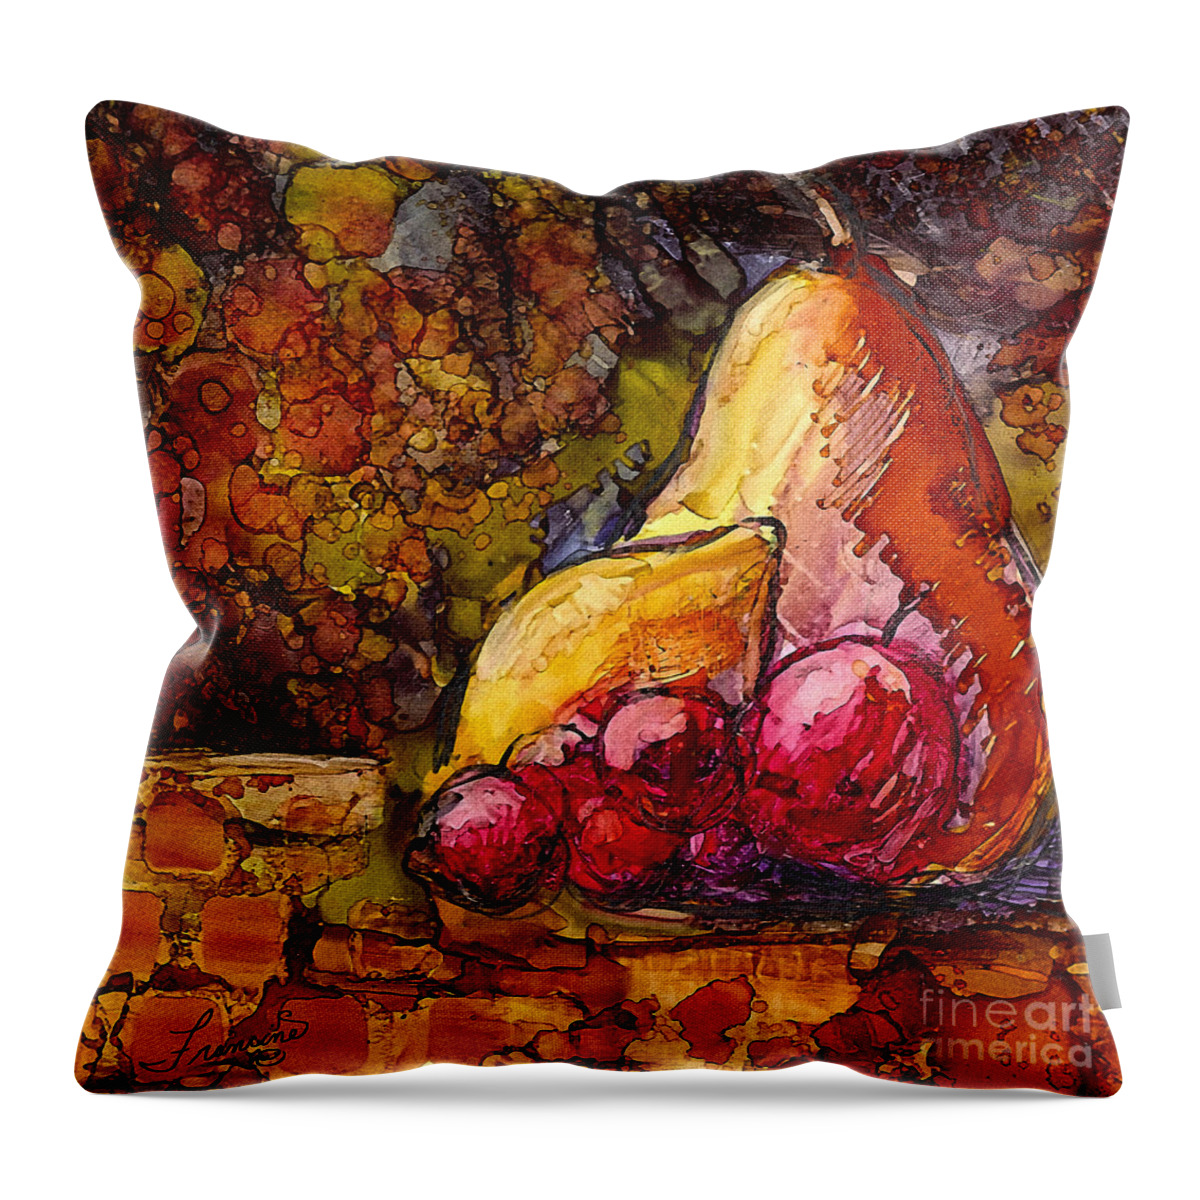 Alcohol Inks Throw Pillow featuring the painting Ai-7 #1 by Francine Dufour Jones